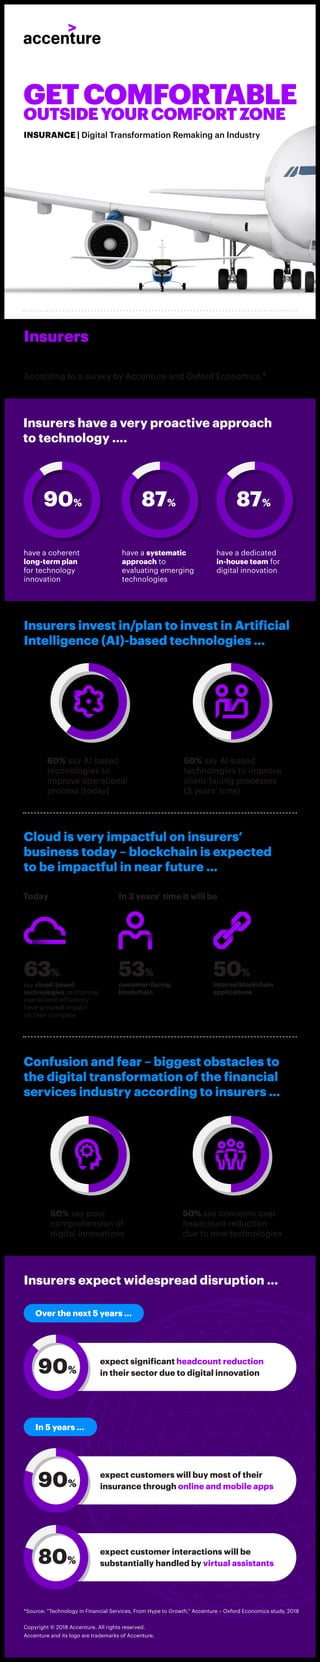 Insurers expect widespread
disruption of their industry
60% say AI-based
technologies to
improve operational
process (today)
say cloud-based
technologies to improve
operational efficiency
have greatest impact
on their company
In 3 years’ time it will be
customer-facing
blockchain
internal blockchain
applications
50% say AI-based
technologies to improve
client-facing processes
(3 years’ time)
According to a survey by Accenture and Oxford Economics.*
Insurers expect widespread disruption …
Cloud is very impactful on insurers’
business today – blockchain is expected
to be impactful in near future …
Insurers invest in/plan to invest in Artificial
Intelligence (AI)-based technologies …
53% 50%63%
*Source: “Technology in Financial Services, From Hype to Growth,” Accenture – Oxford Economics study, 2018
Copyright © 2018 Accenture. All rights reserved.
Accenture and its logo are trademarks of Accenture.
GETCOMFORTABLE
OUTSIDEYOURCOMFORTZONE
INSURANCE | Digital Transformation Remaking an Industry
expect significant headcount reduction
in their sector due to digital innovation90%
expect customers will buy most of their
insurance through online and mobile apps90%
expect customer interactions will be
substantially handled by virtual assistants80%
Insurers have a very proactive approach
to technology ….
90% 87% 87%
have a systematic
approach to
evaluating emerging
technologies
have a dedicated
in-house team for
digital innovation
have a coherent
long-term plan
for technology
innovation
Today
50% say poor
comprehension of
digital innovations
50% say concerns over
headcount reduction
due to new technologies
Confusion and fear – biggest obstacles to
the digital transformation of the financial
services industry according to insurers …
Over the next 5 years …
In 5 years …
 